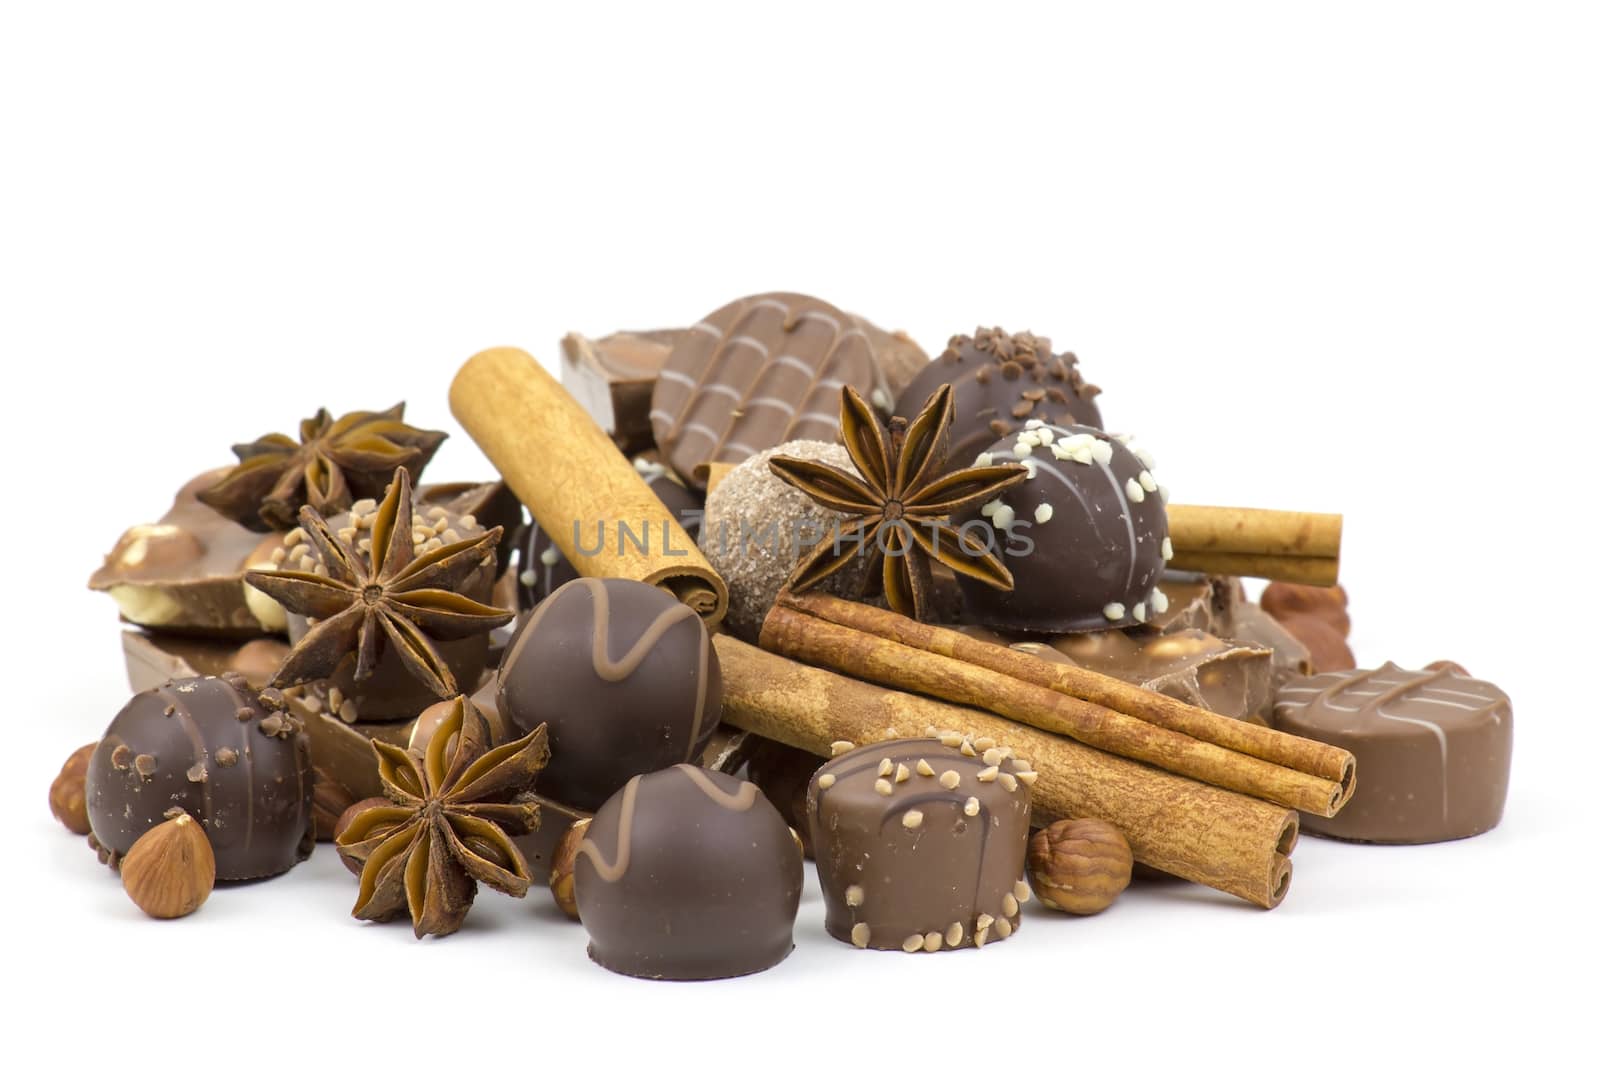 chocolate, spices and nuts on white background by miradrozdowski